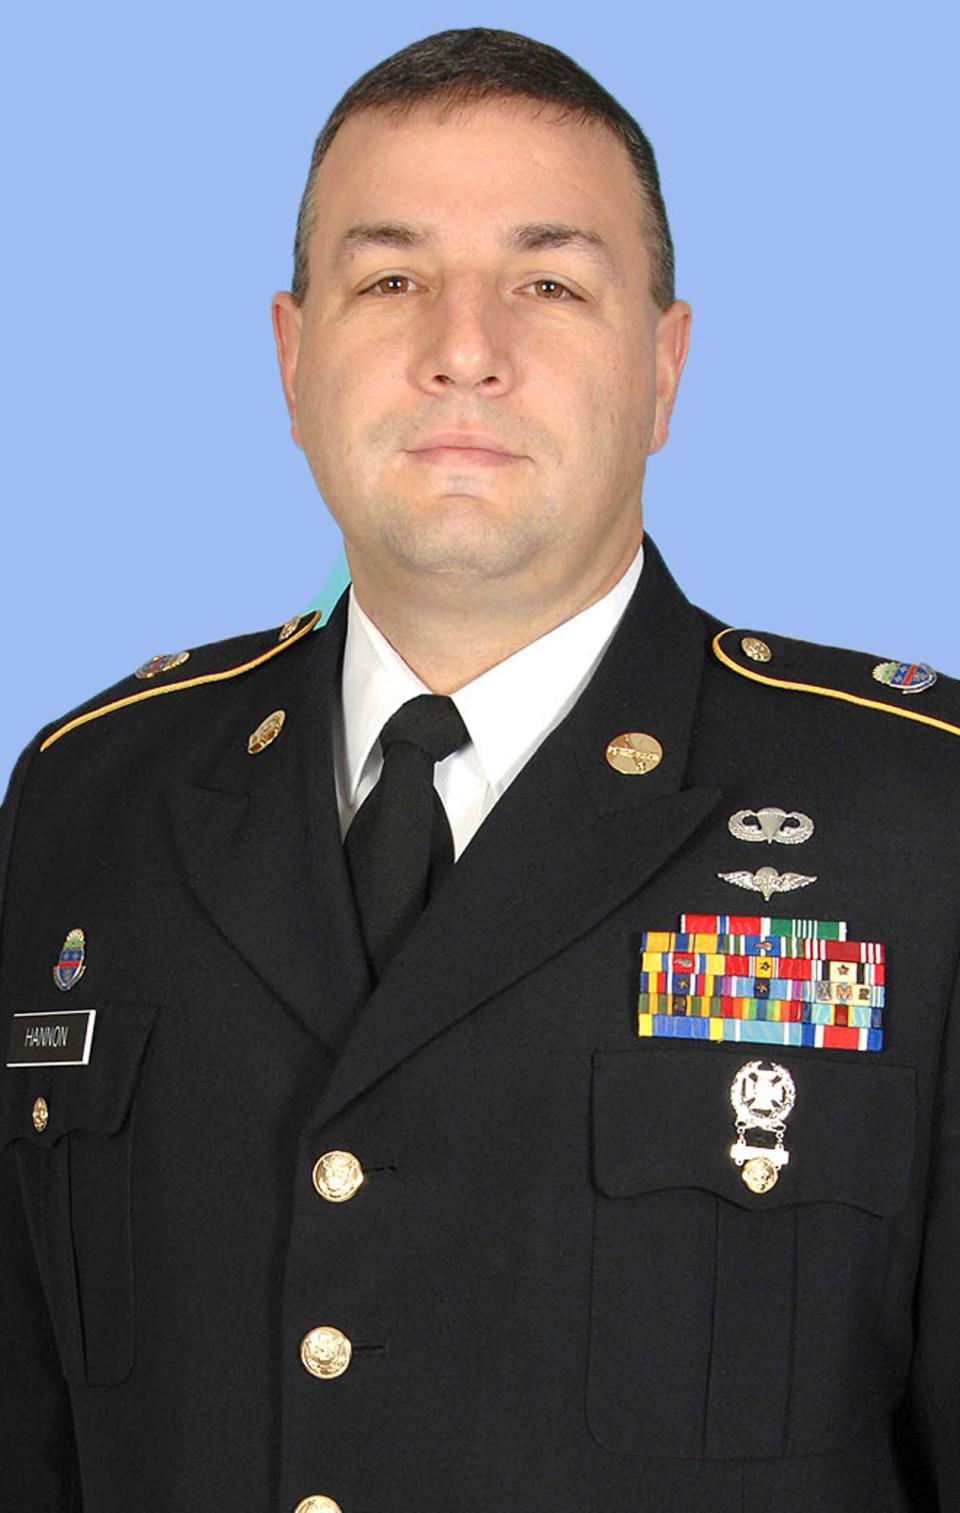 Ohio National Guard Sgt. 1st Class Shawn Hannon. The U.S. Defense Department says Hannon was among three members of the same Columbus-based Ohio National Guard unit killed in a suicide vehicle bomb attack in 2012 in Faryab province in northern Afghanistan.